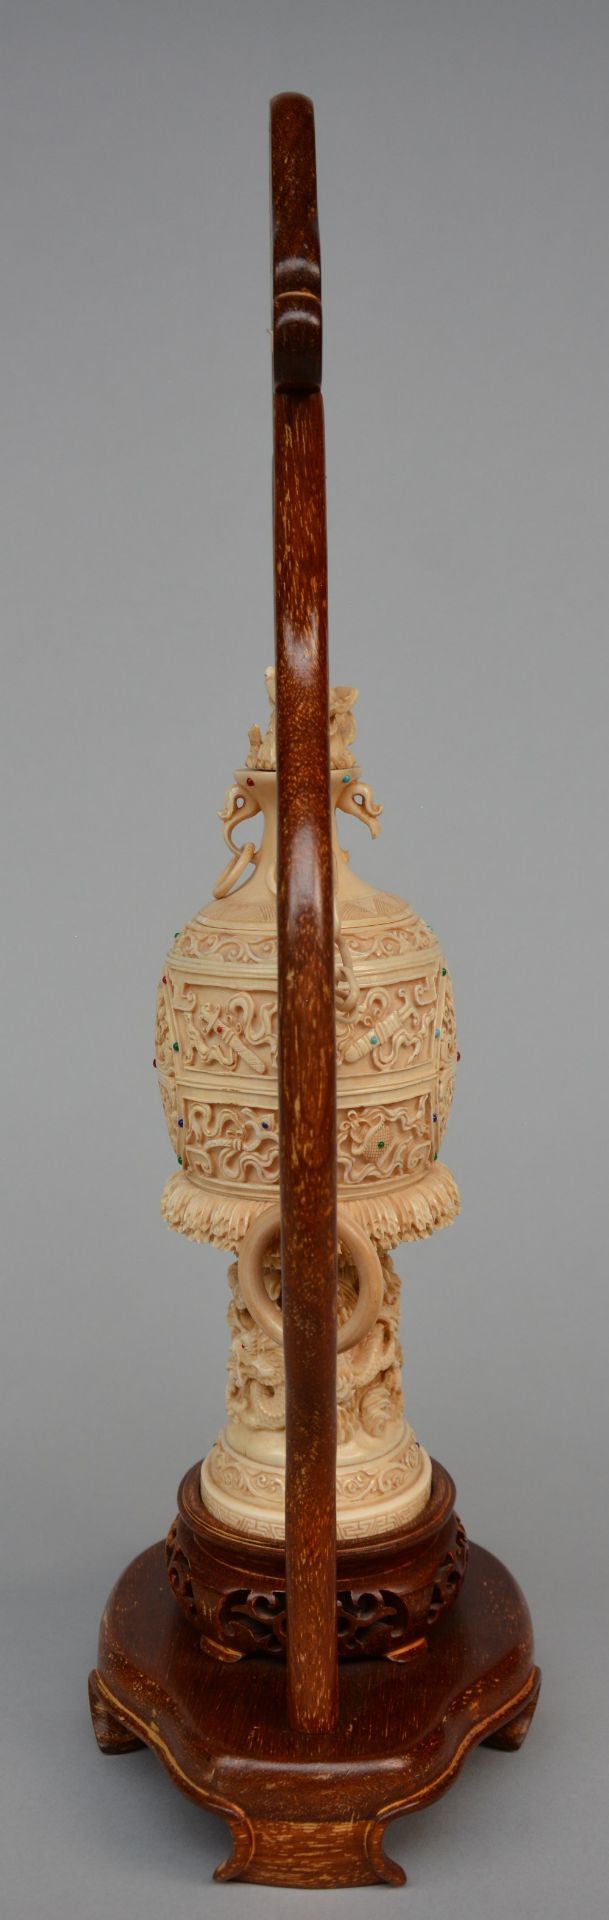 A Chinese ivory vase with cover with relief decoration of dragons, inlaid with various precious - Image 2 of 10